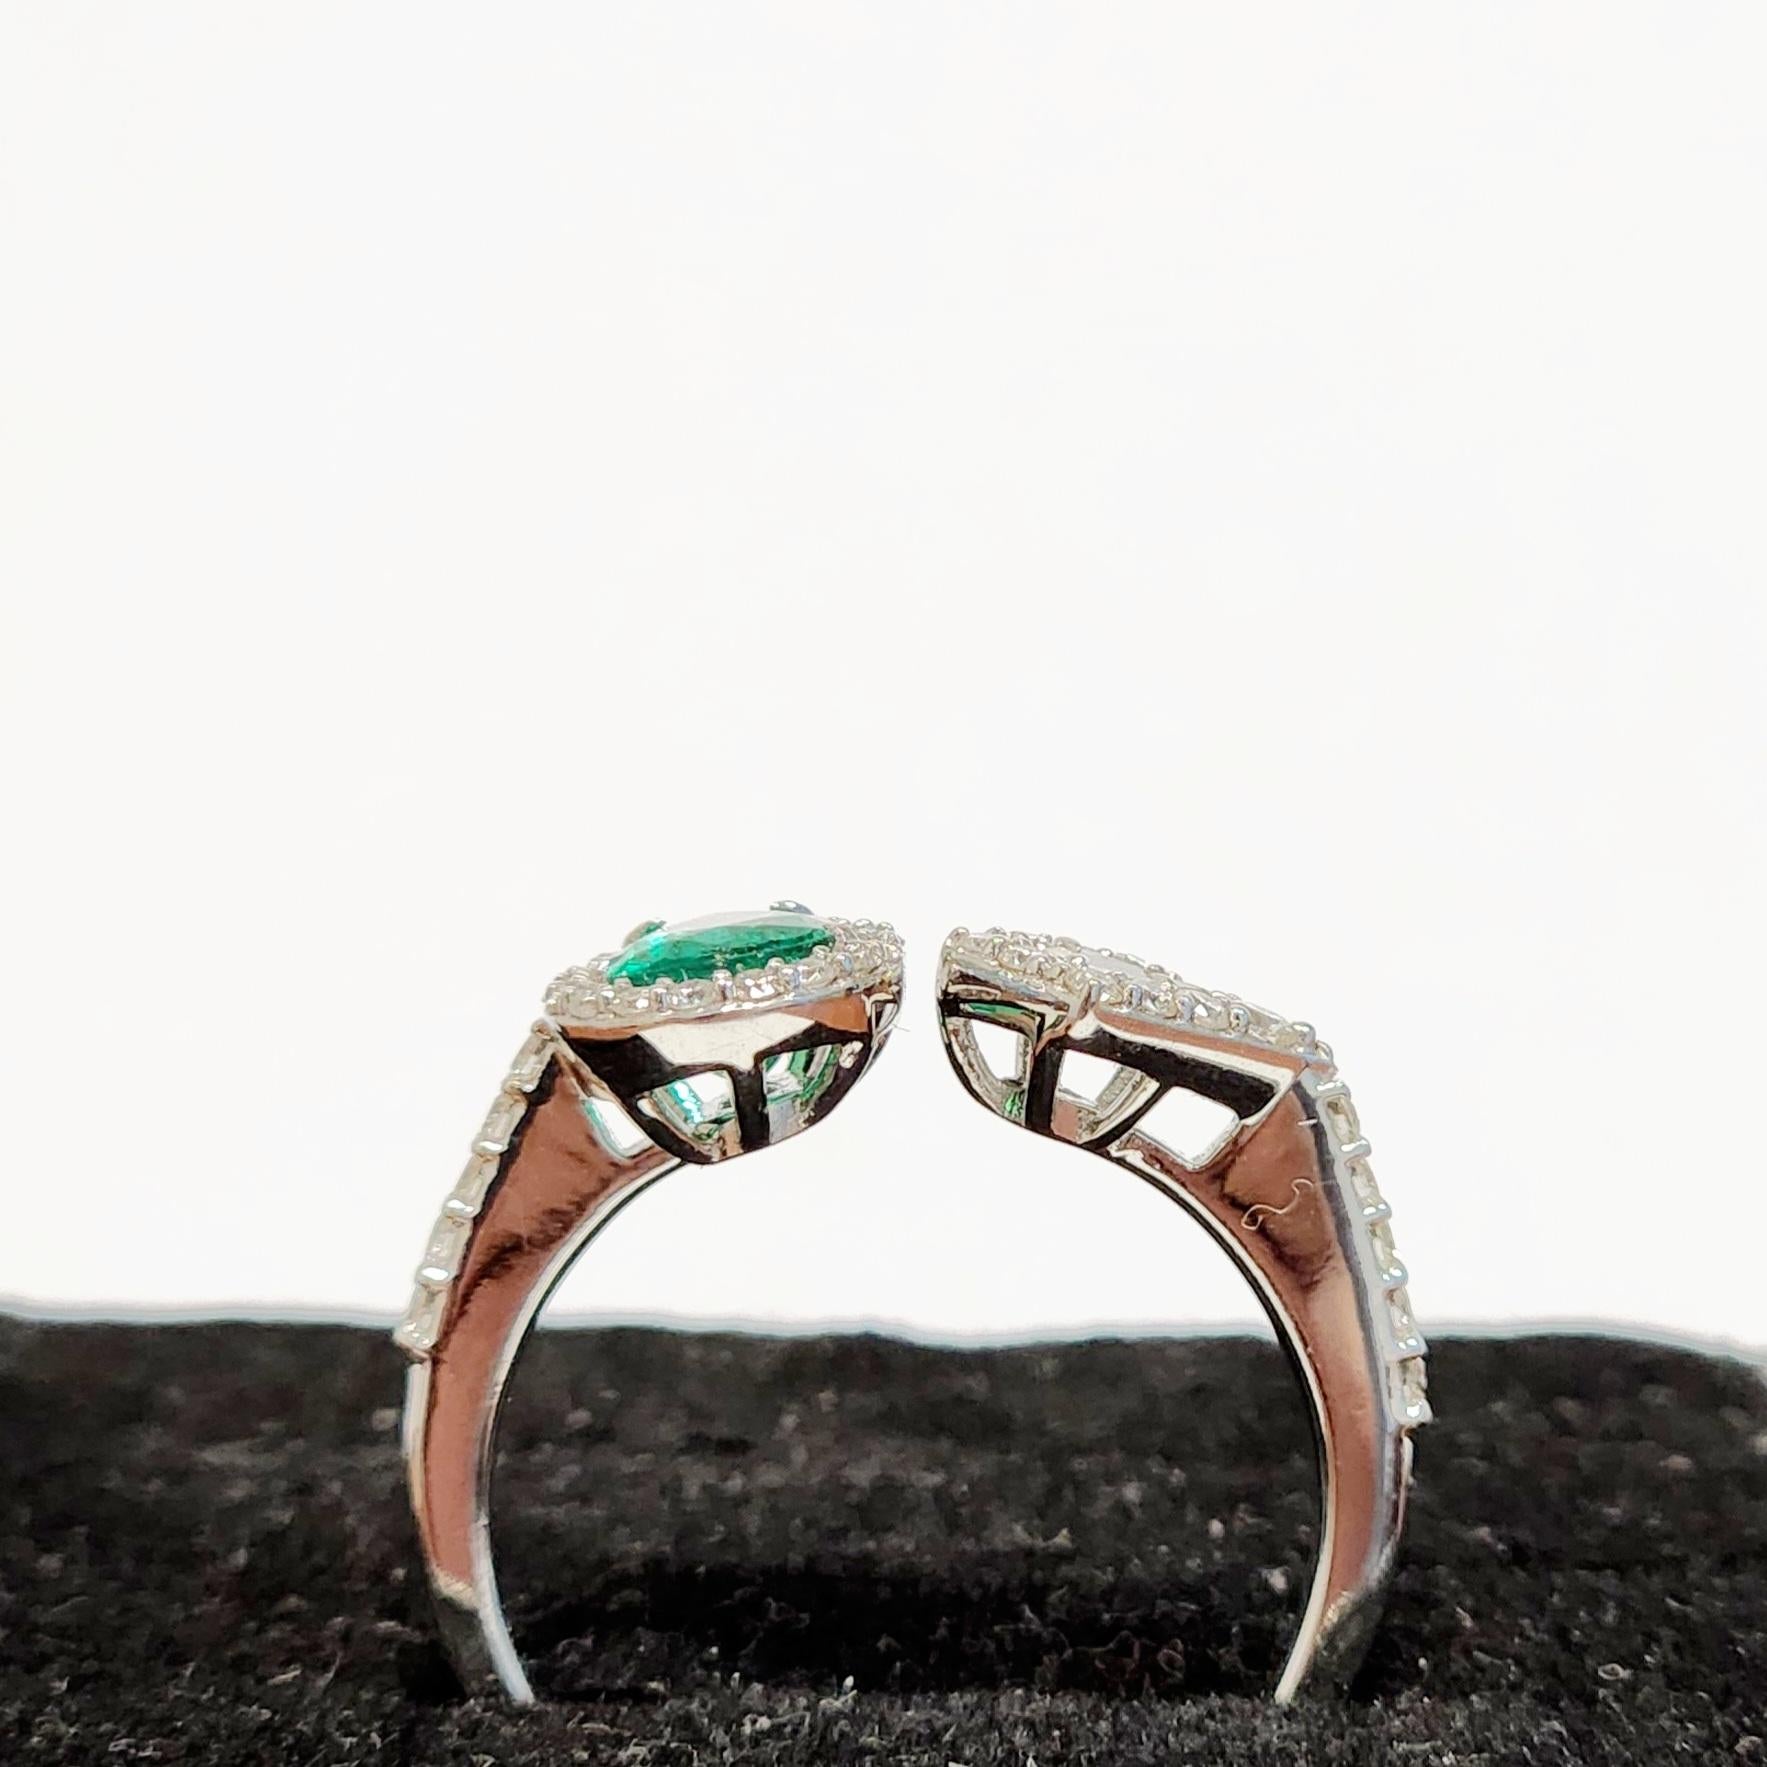 Exquisite Toi Et Moi Emerald and Kite Shaped Diamond Ring For Sale 1